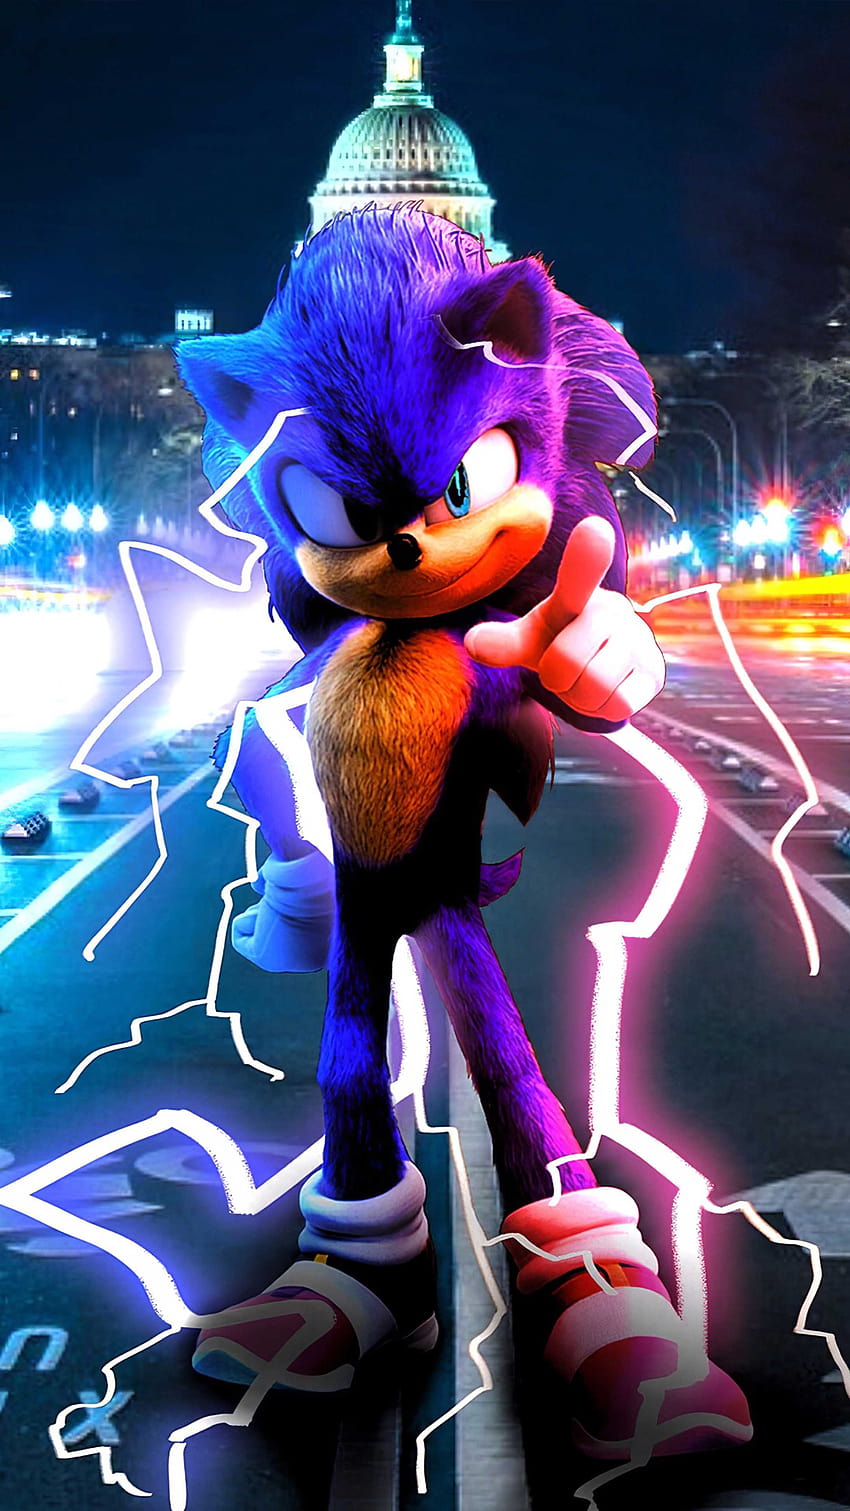 Sonic The Hedgehog Poster 2020 Ultra Mobile, sonic 2 ipad HD phone wallpaper